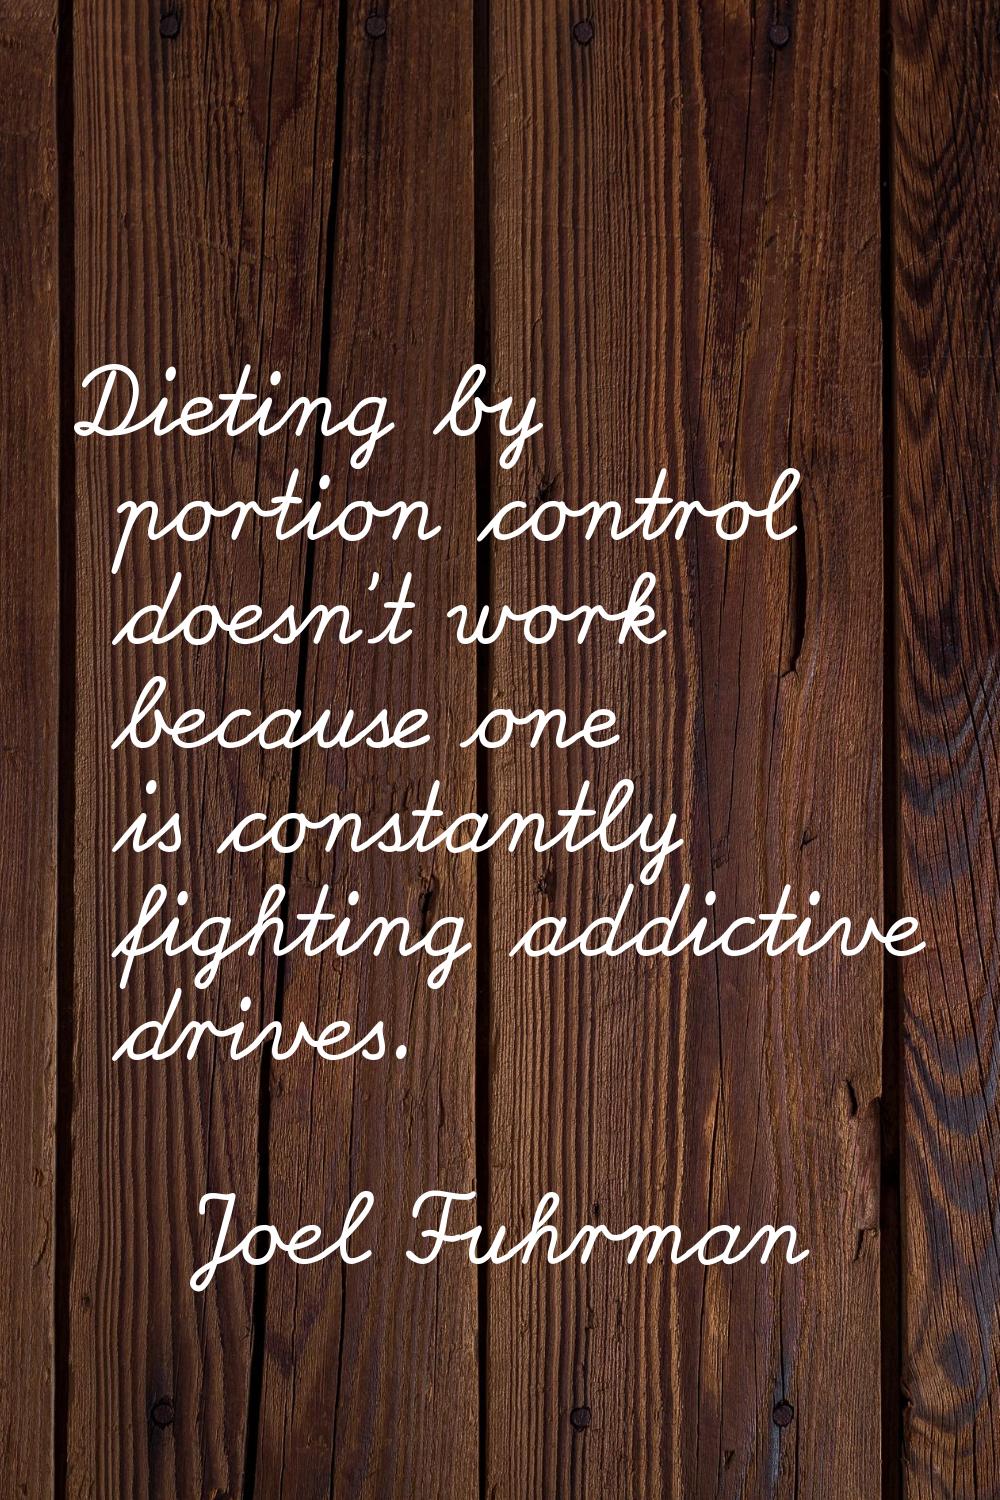 Dieting by portion control doesn't work because one is constantly fighting addictive drives.